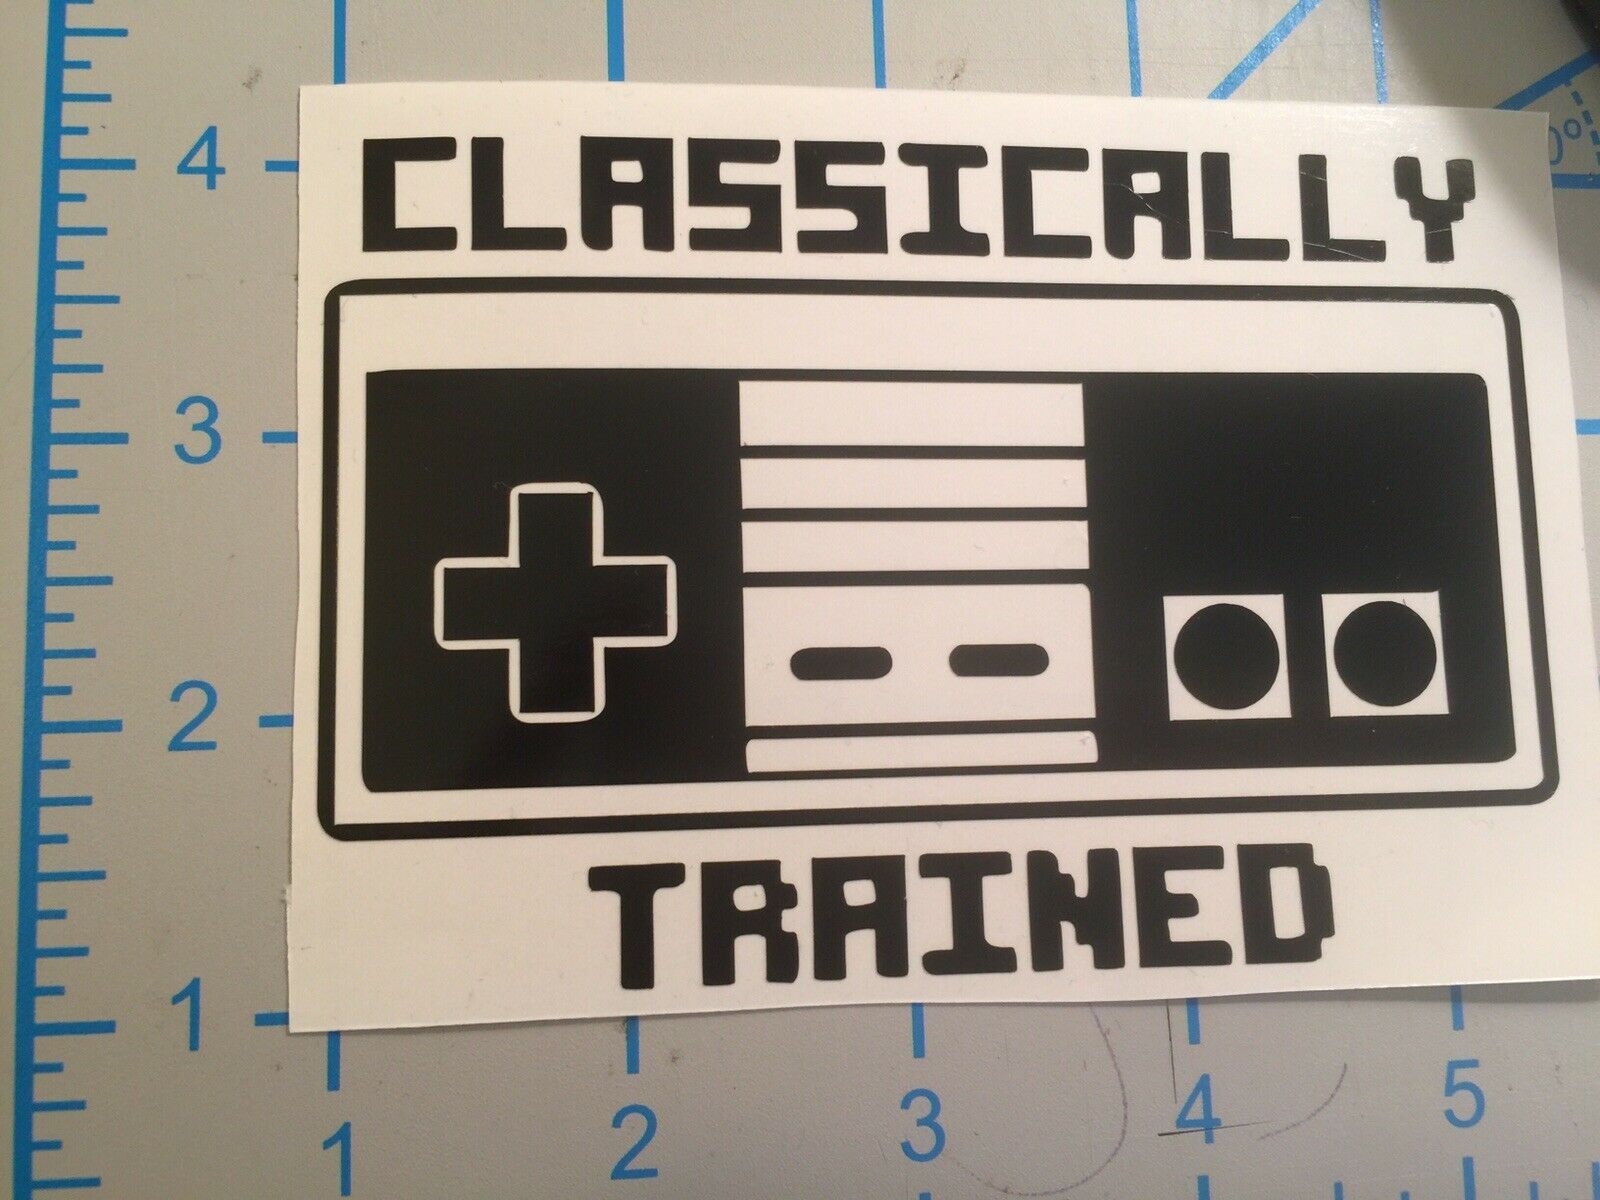 Classically Trained|Remote|Nintendo|Video Games|Gamer|You Pick Color|Vinyl|Decal